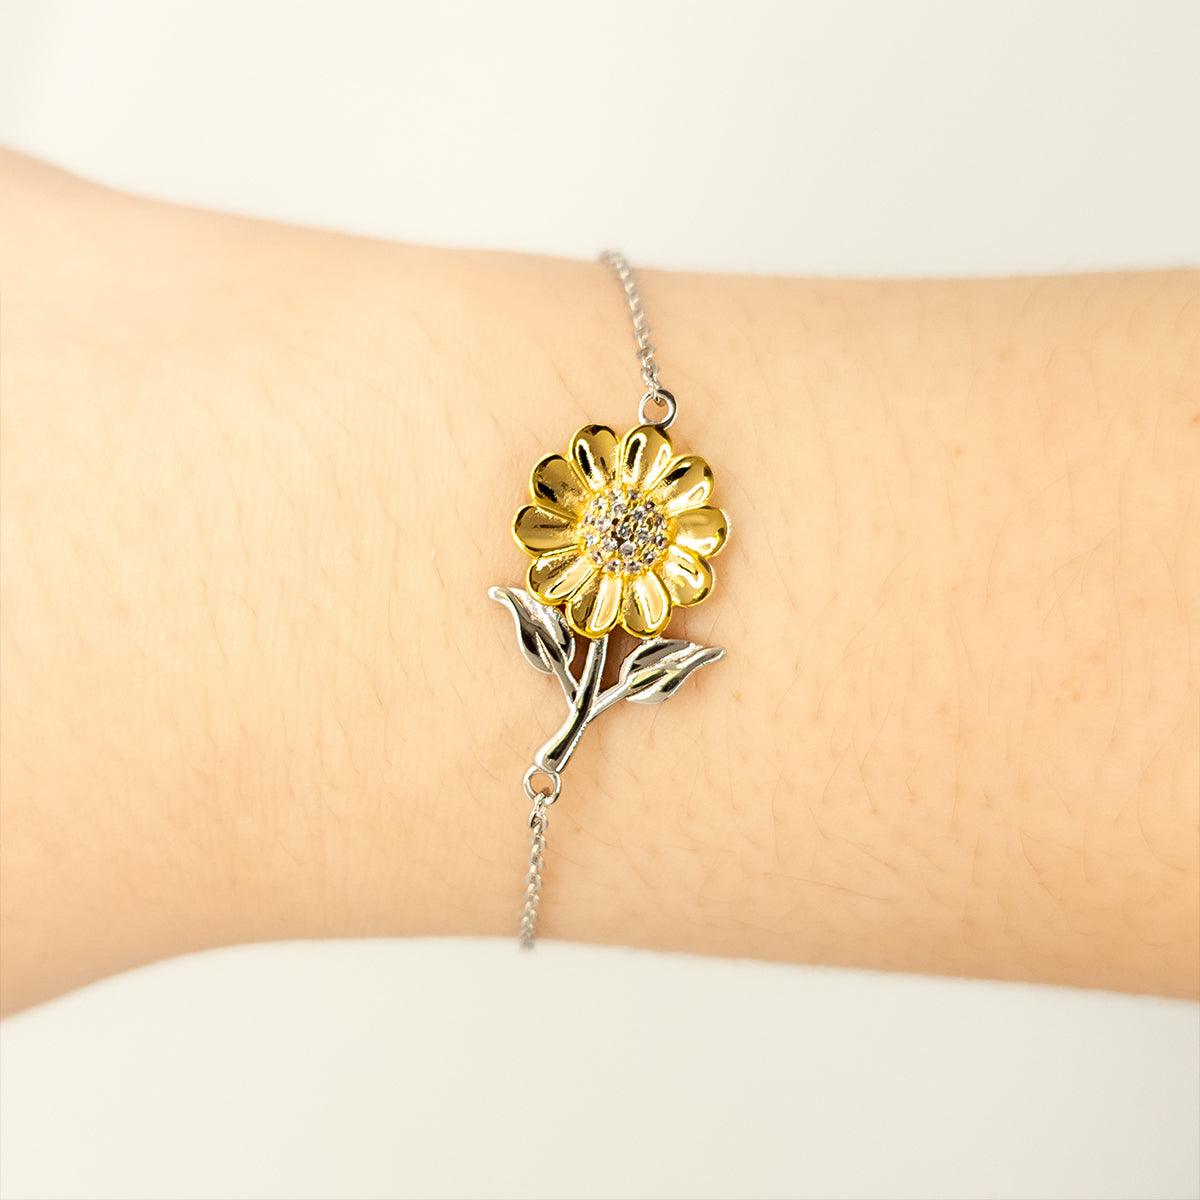 Remarkable Coach Gifts, Your dedication and hard work, Inspirational Birthday Christmas Unique Sunflower Bracelet For Coach, Coworkers, Men, Women, Friends - Mallard Moon Gift Shop